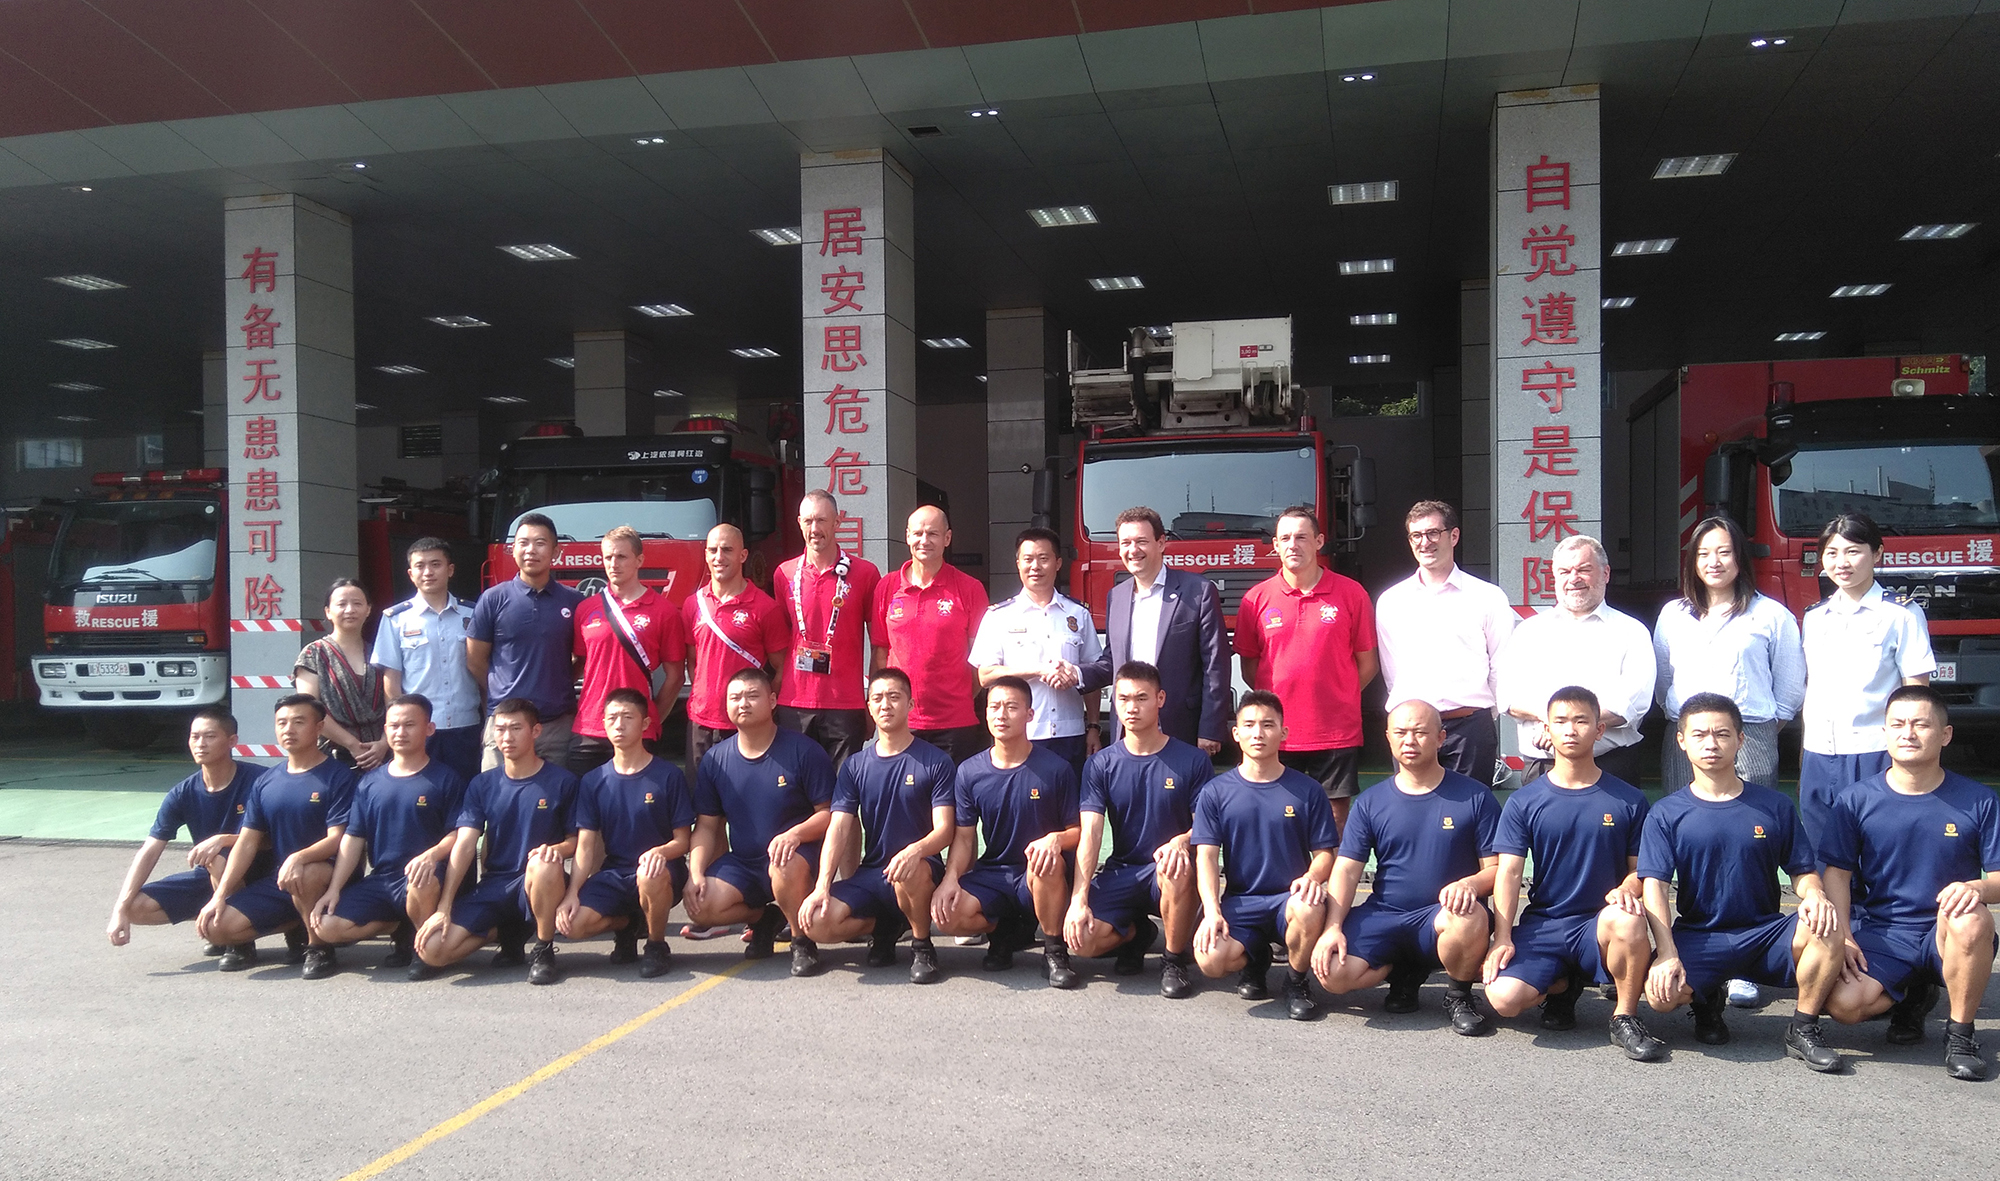 The Brussels and Chinese firemen pose in front of the fire station.